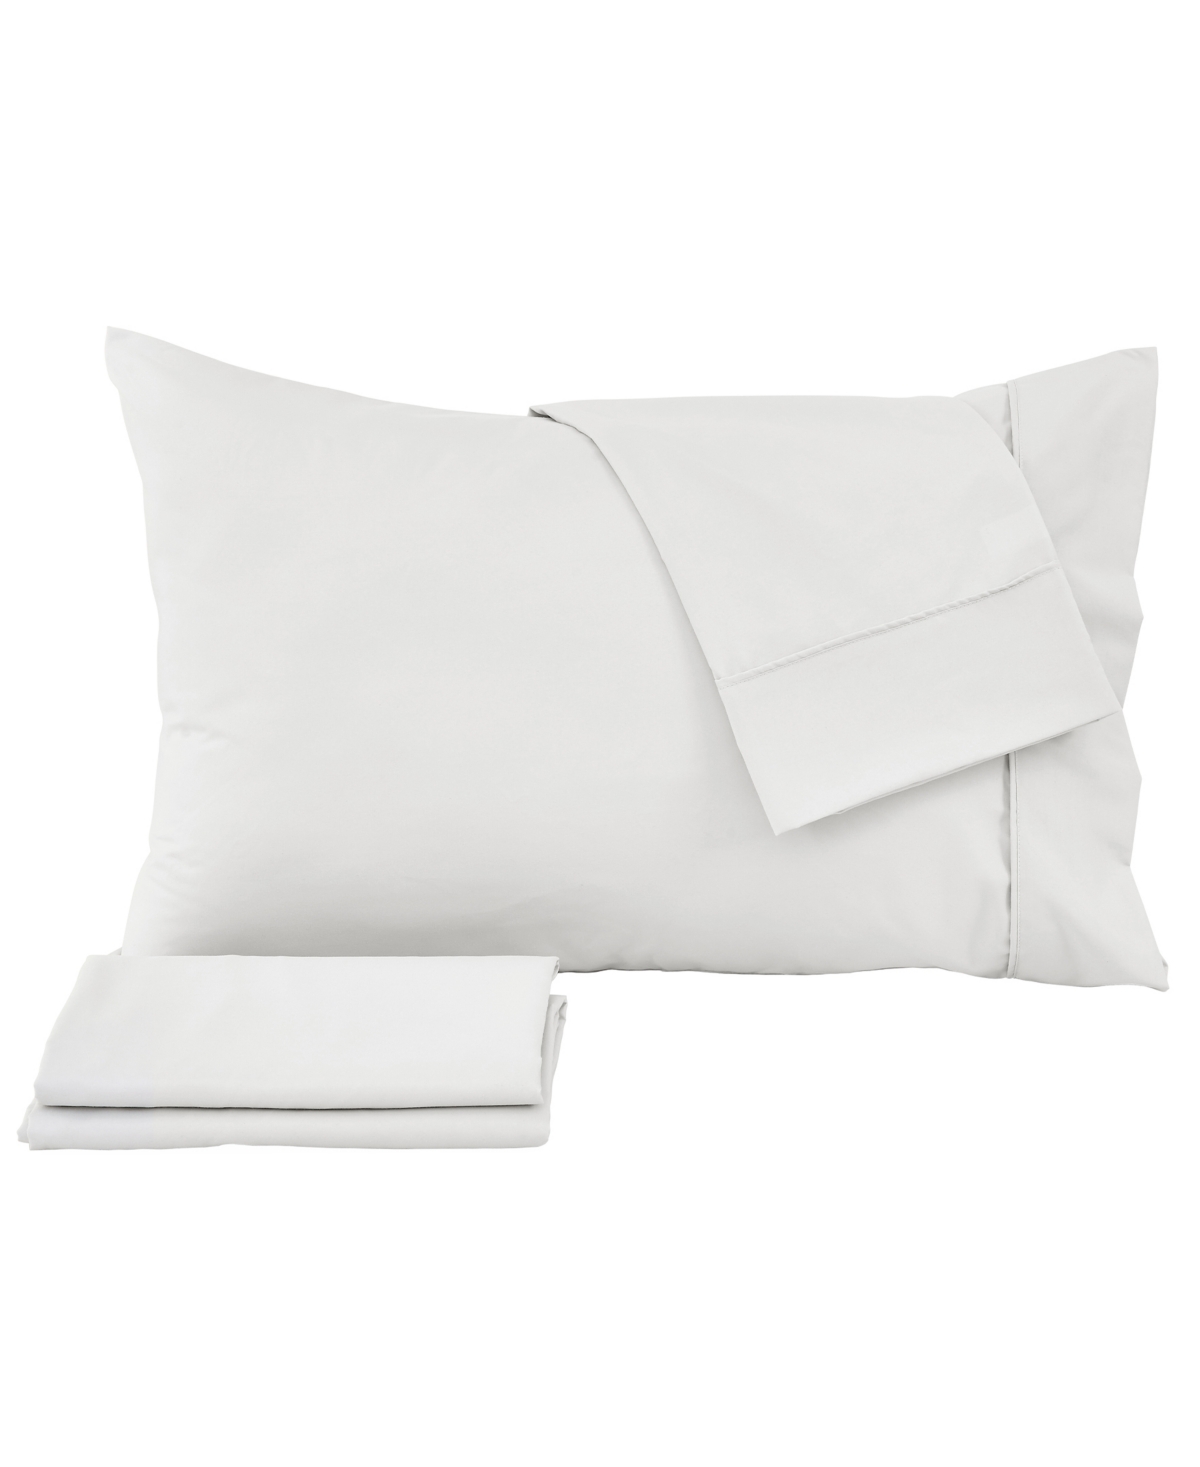 Premium Comforts Solid Microfiber Ultra Soft 3 Piece Sheet Set, Twin In White